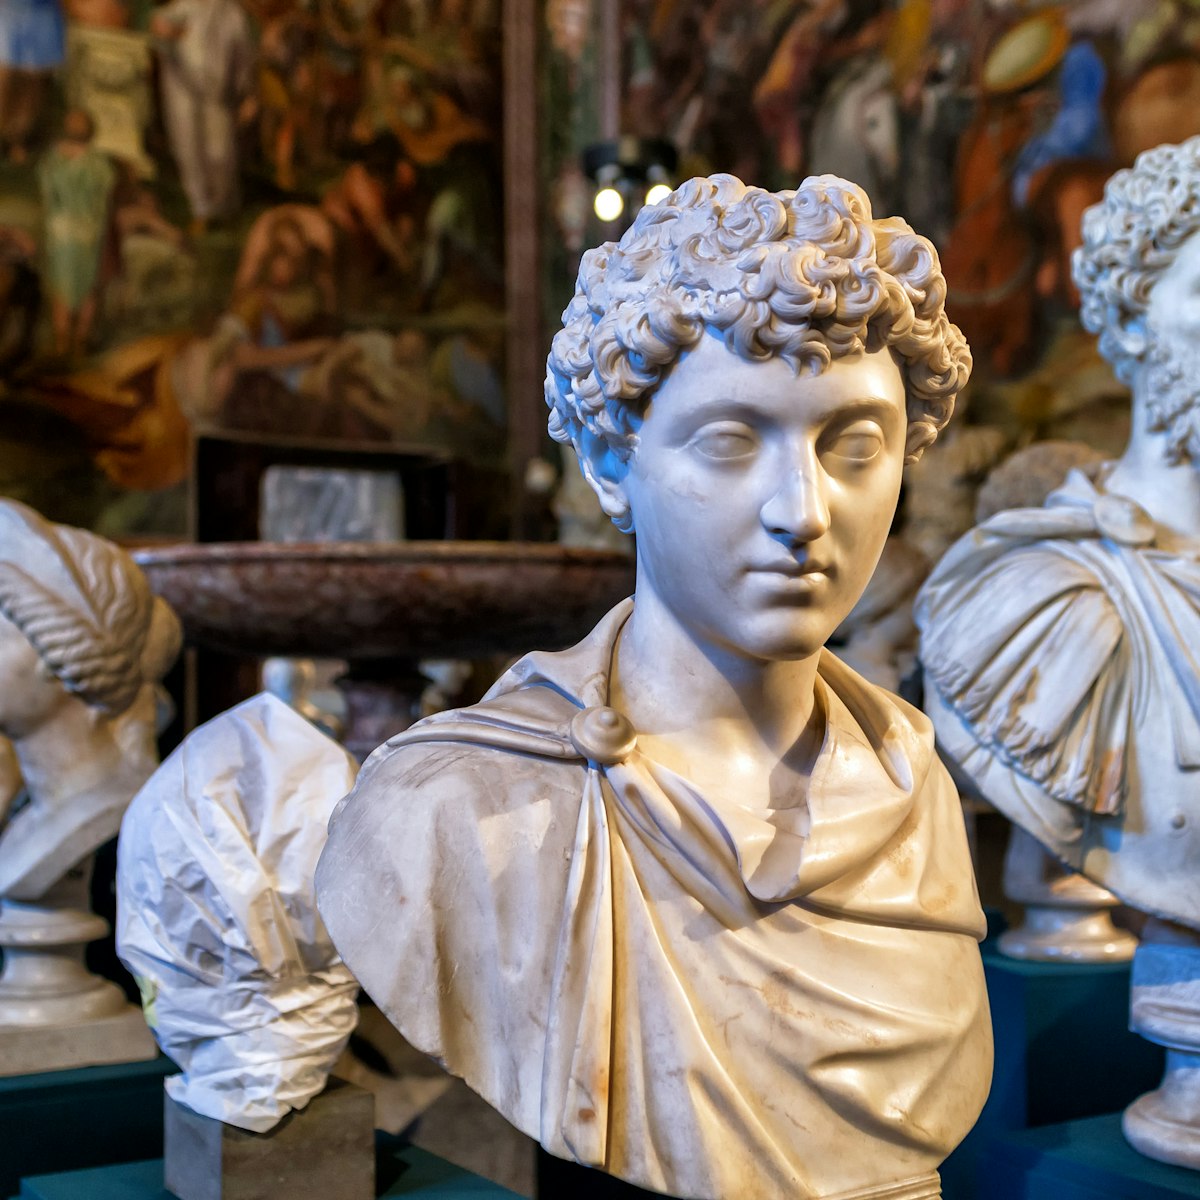 OCTOBER 3, 2012: Antique marble busts inside the Capitoline Museum.
311817245
hill, italian, nobody, rome, national, sculpture, capitol, italy, travel, statue, european, destinations, culture, landmark, attraction, details, old, roman, historic, figure, famous, interior, inside, classic, exhibit, tourism, art, roma, antique, ancient, indoor, vacation, capitoline, europe, museum, close-up, luxury, human, man, nice, tourist, many, lot, history, stone, marble, head, fine, hellenistic